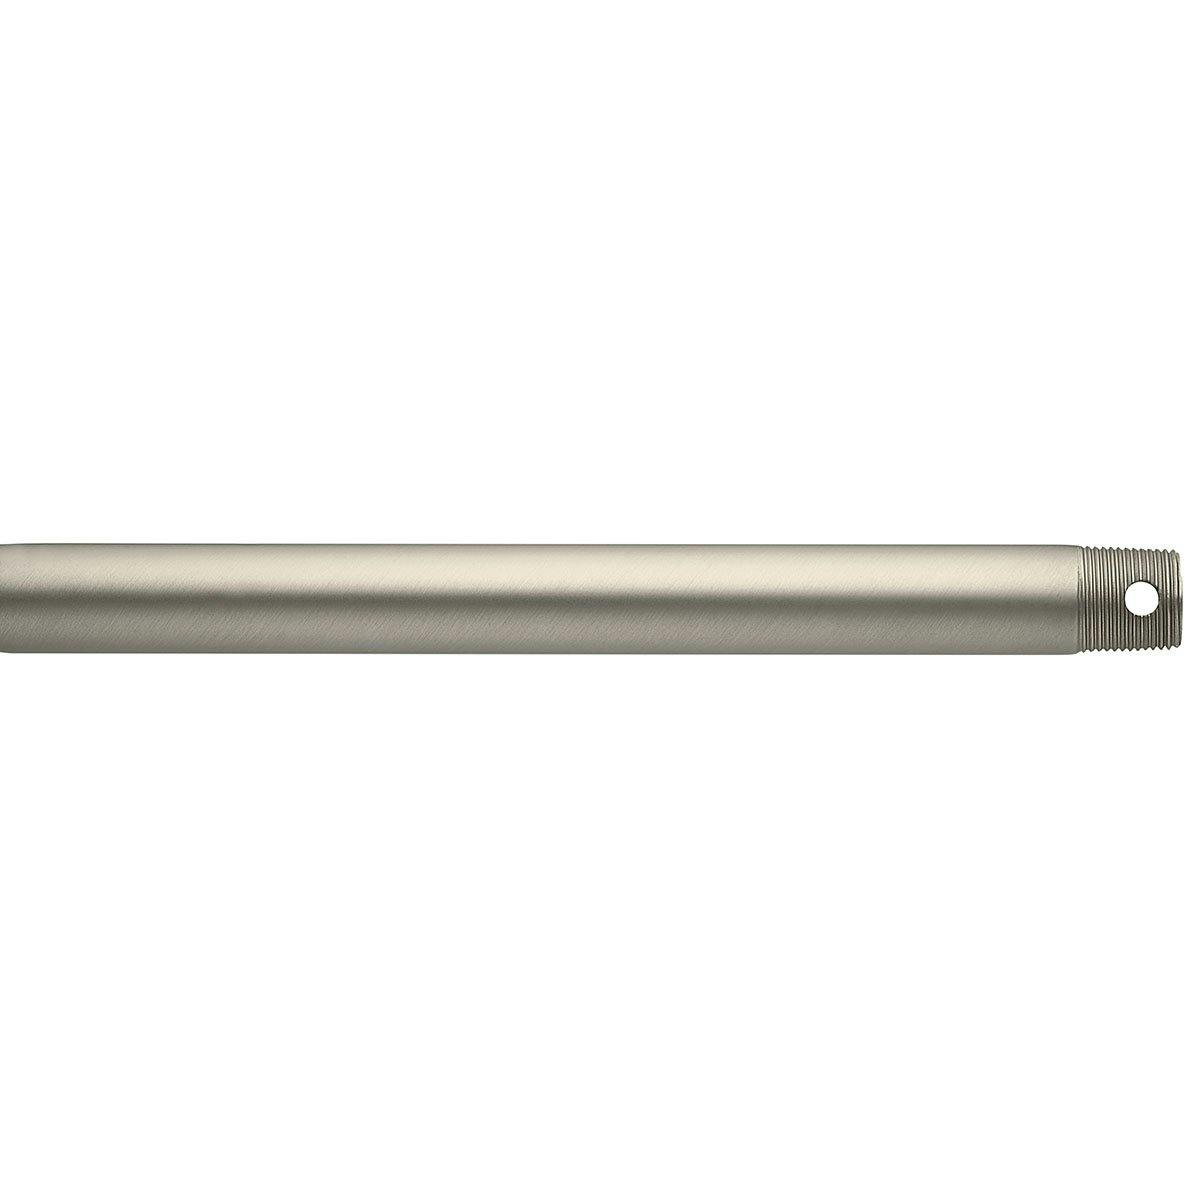 Dual Threaded 36" Downrod Brushed Nickel on a white background